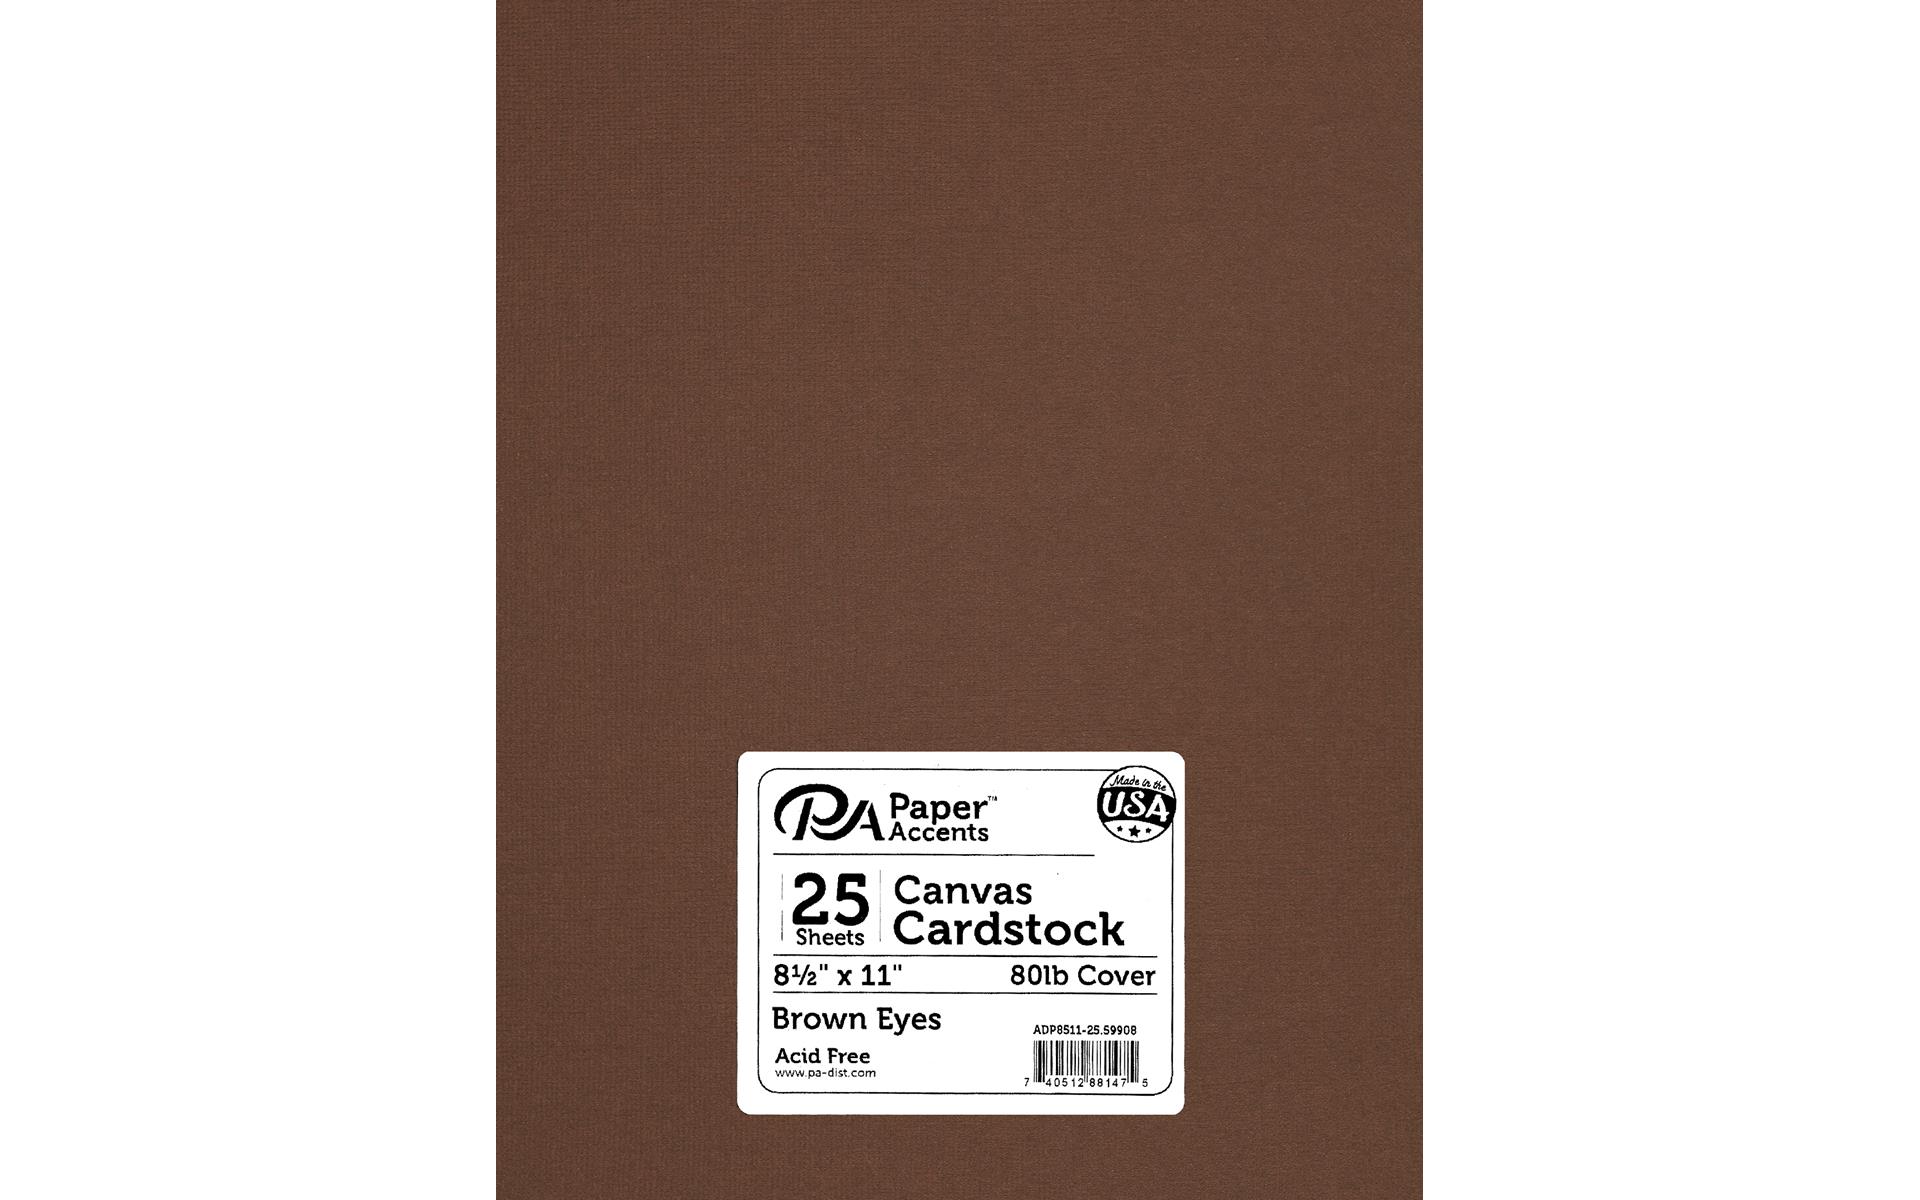 PA Paper Accents Canvas Cardstock 8.5 x 11 Brown Eyes, 80lb